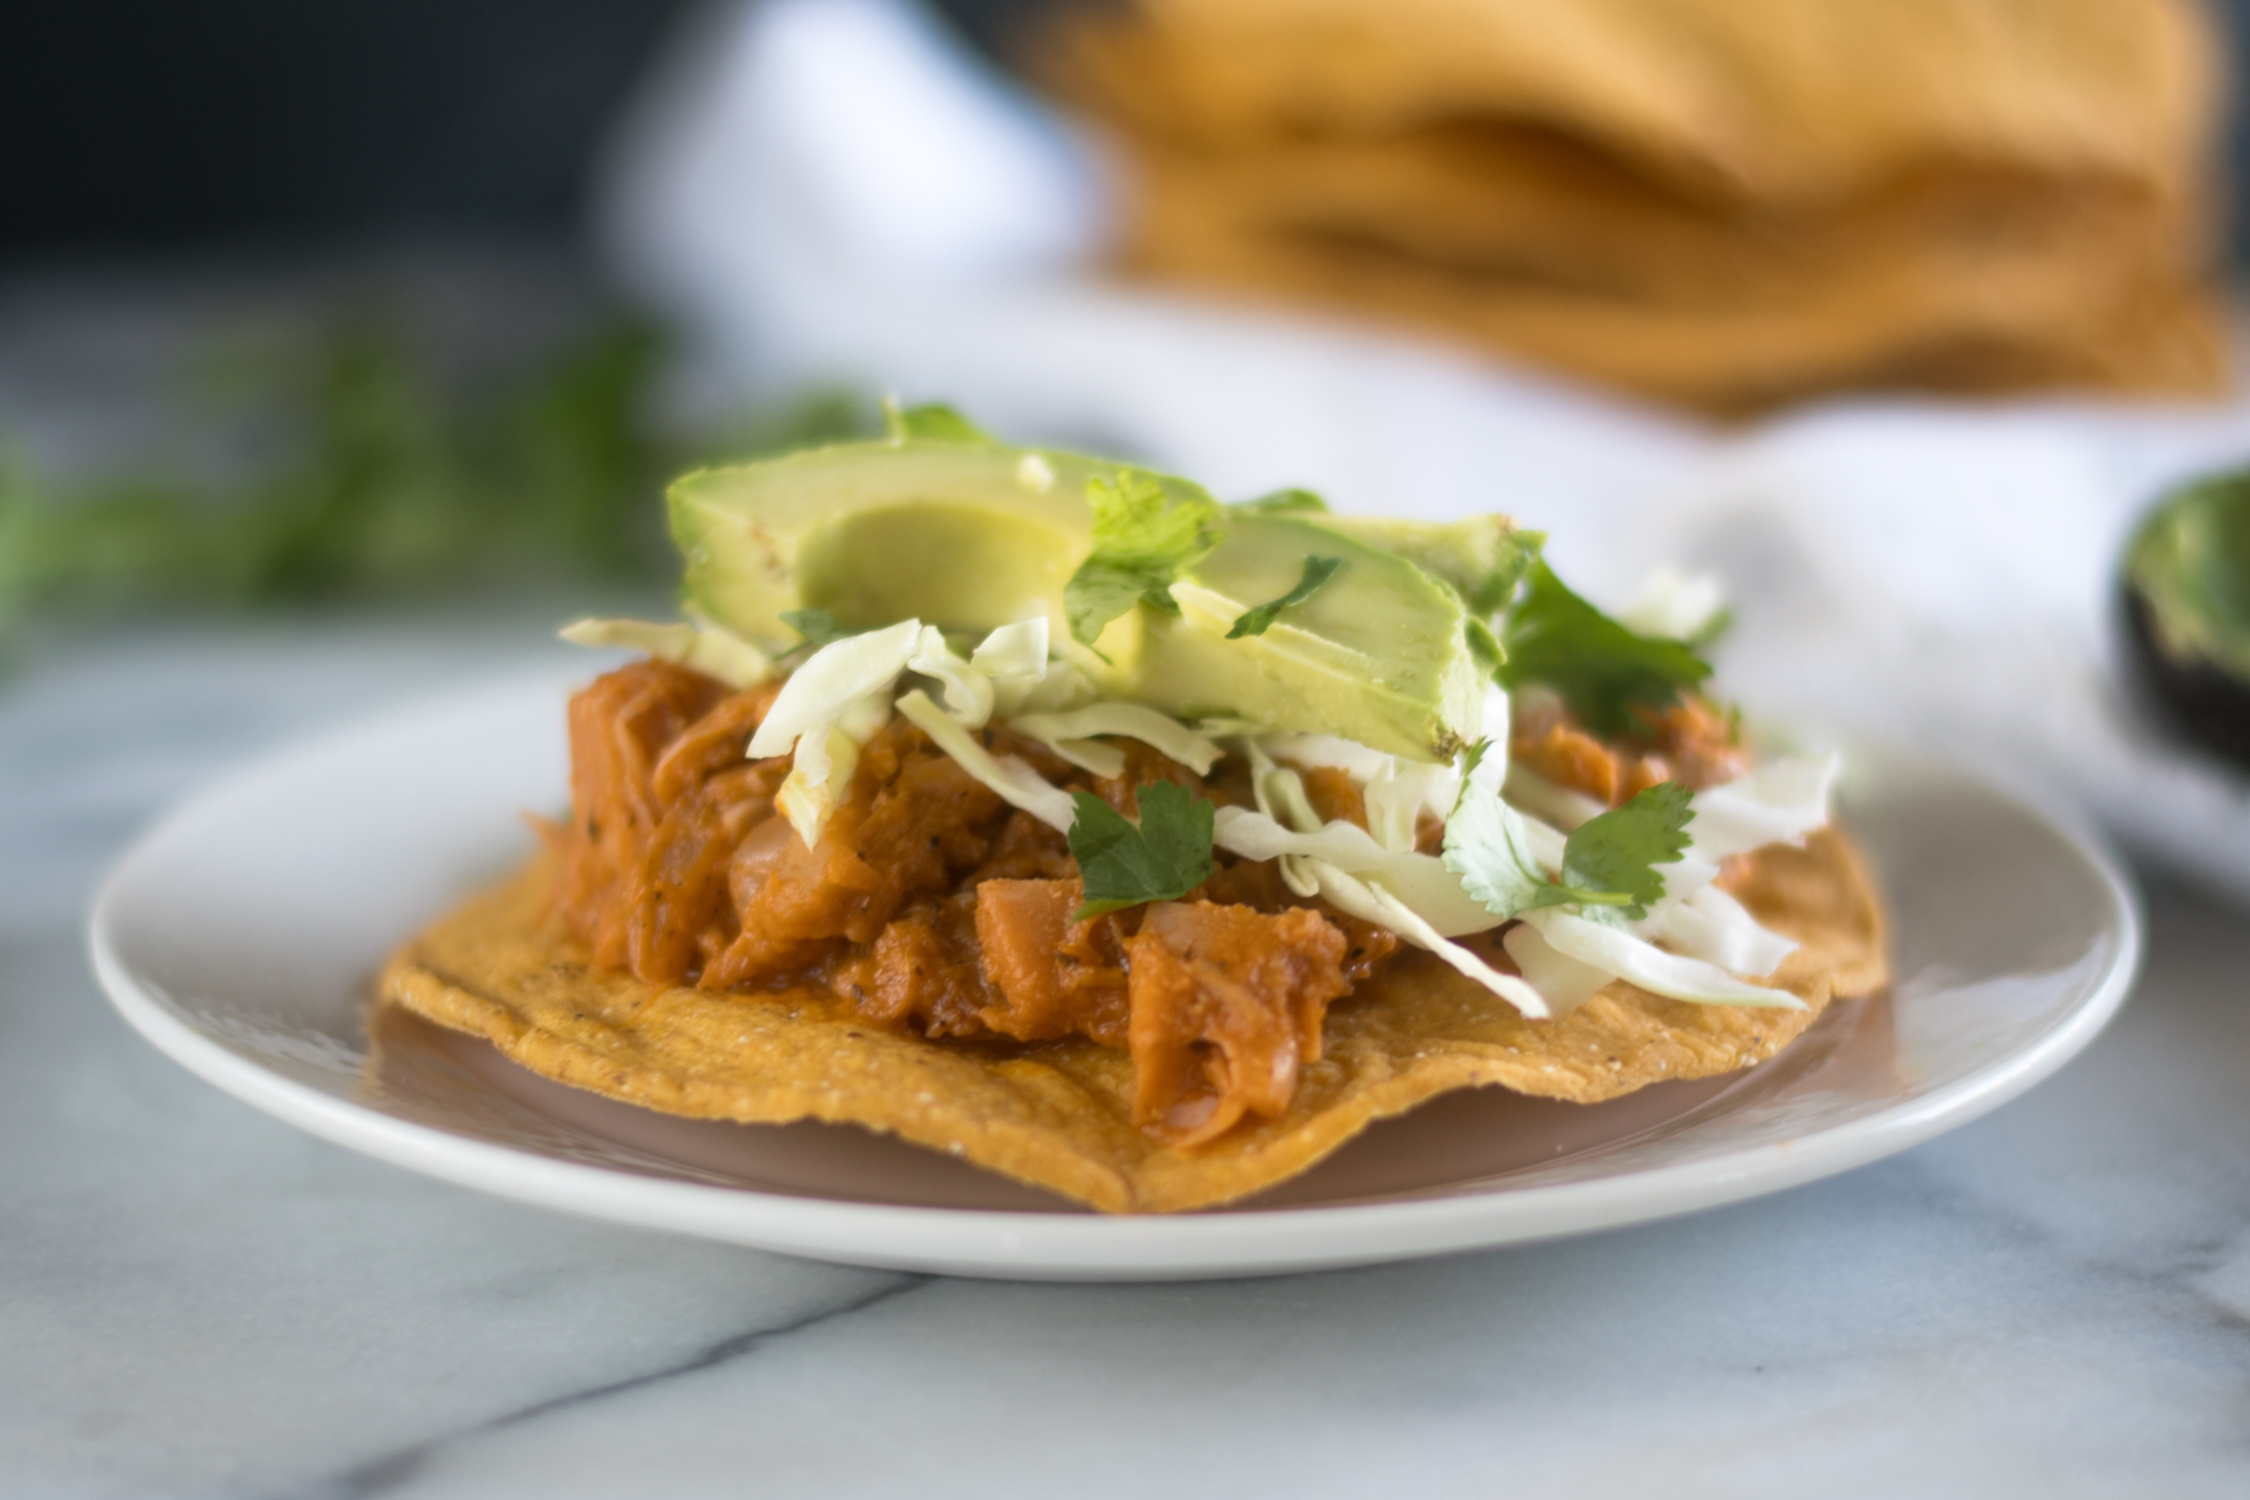 Jackfruit is simmered in a tomato and chipotle sauce in this vegan version of Mexican tinga. #Mexican #Vegan #Recipes 